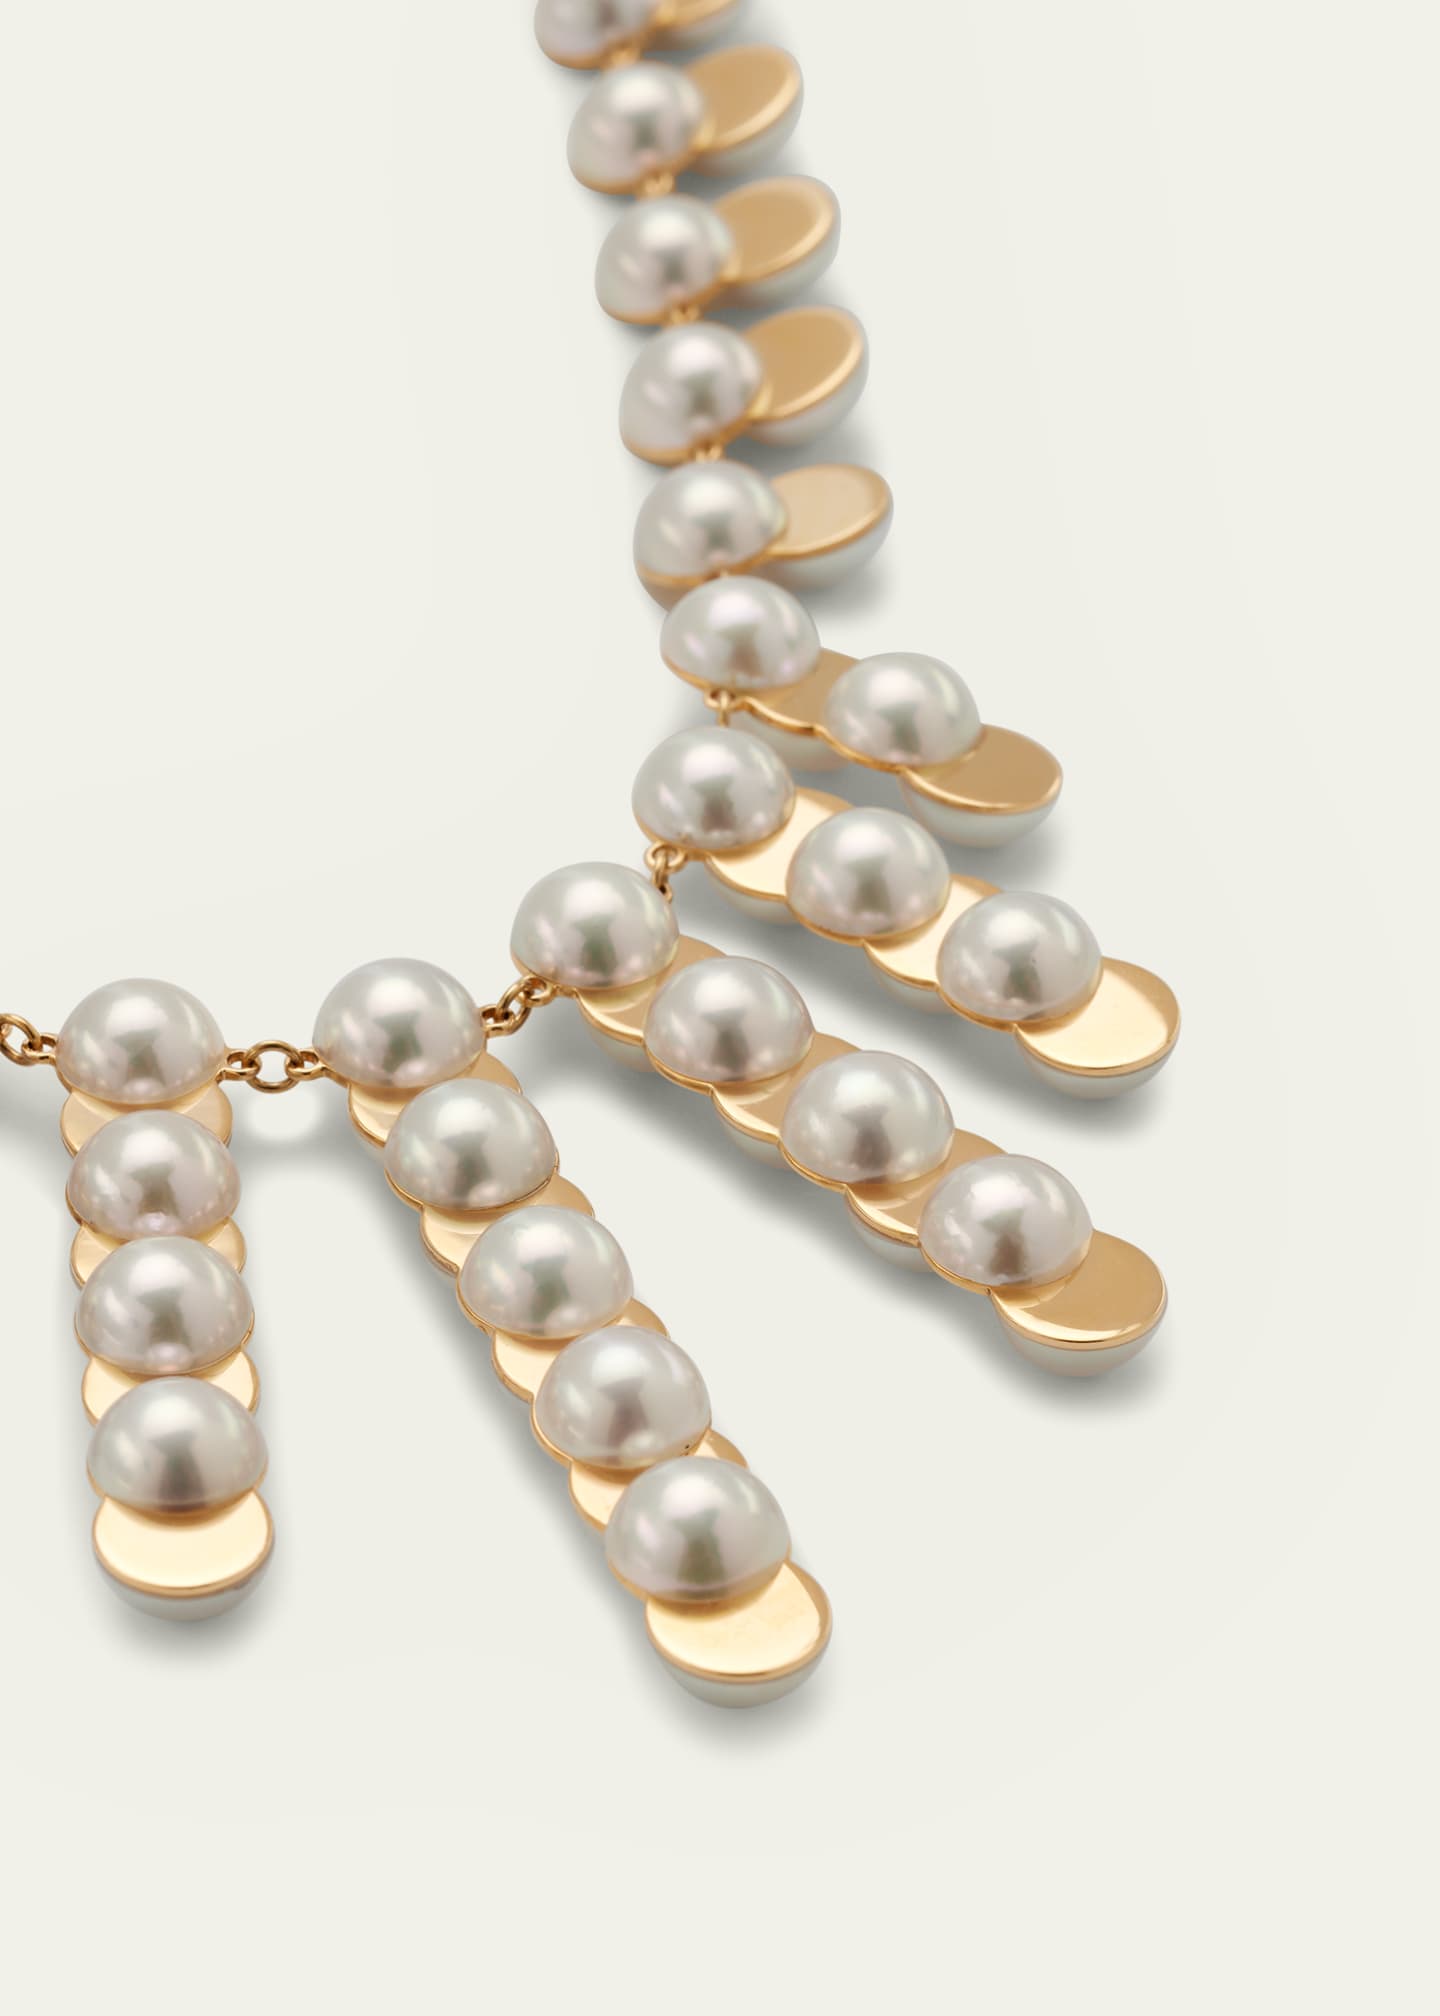 YUTAI Slide Necklace with Akoya Pearls and 18K Gold - Bergdorf Goodman